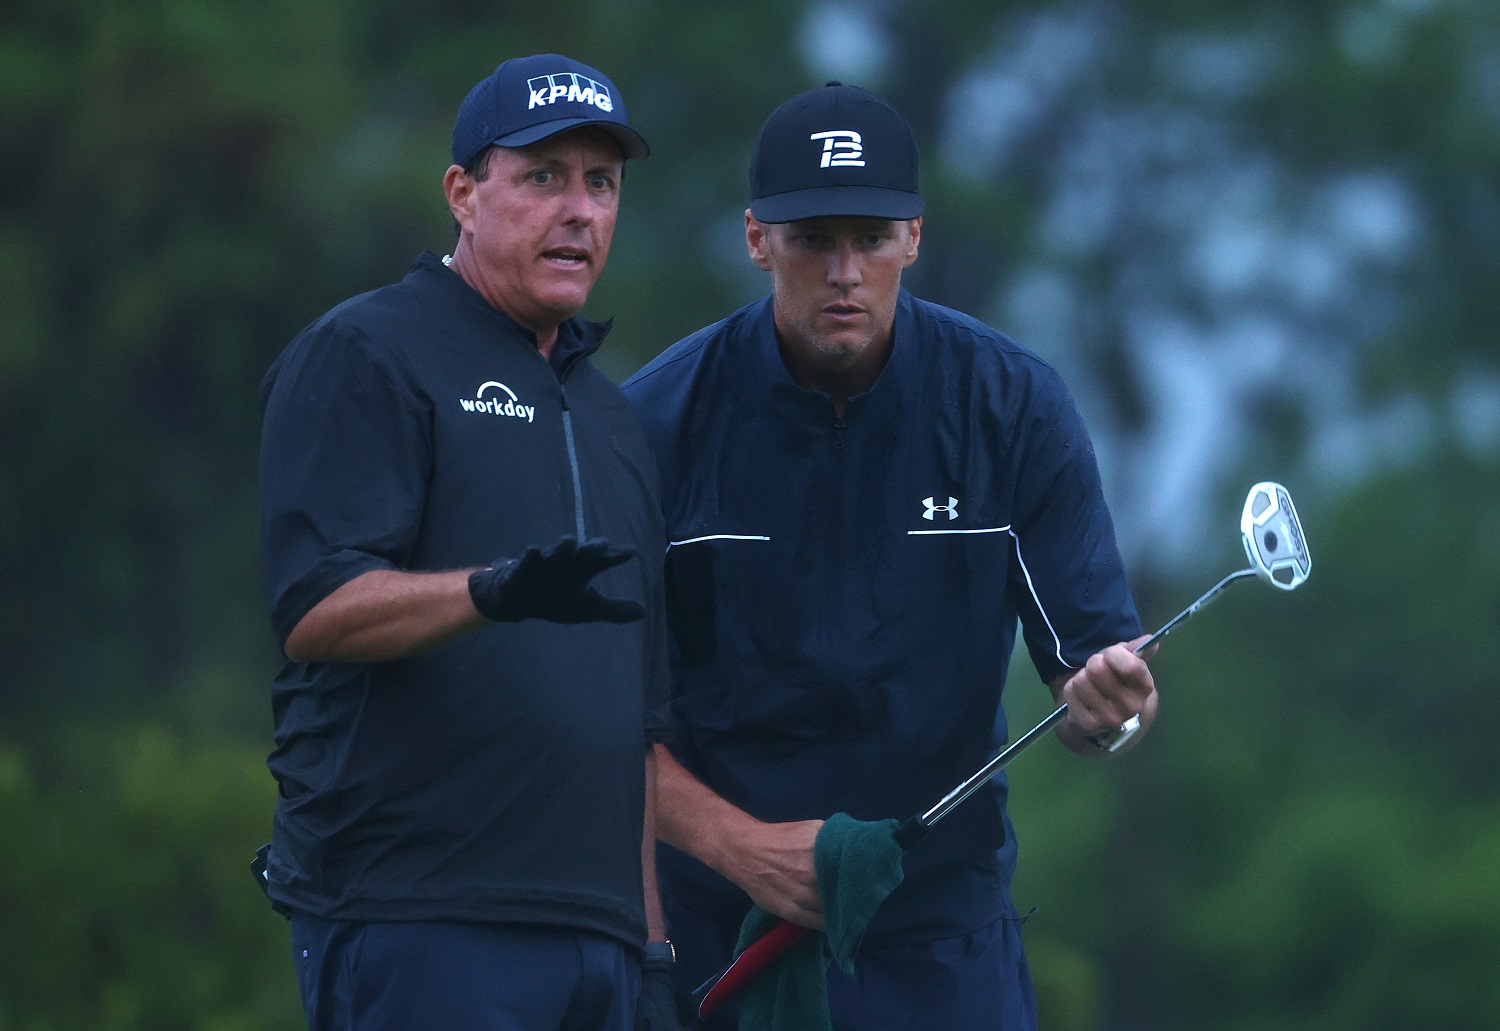 Phil Mickelson reads a putt for Tom Brady on the 17th green during The Match: Champions For Charity at Medalist Golf Club in Hobe Sound, Florida. | Mike Ehrmann/Getty Images for The Match